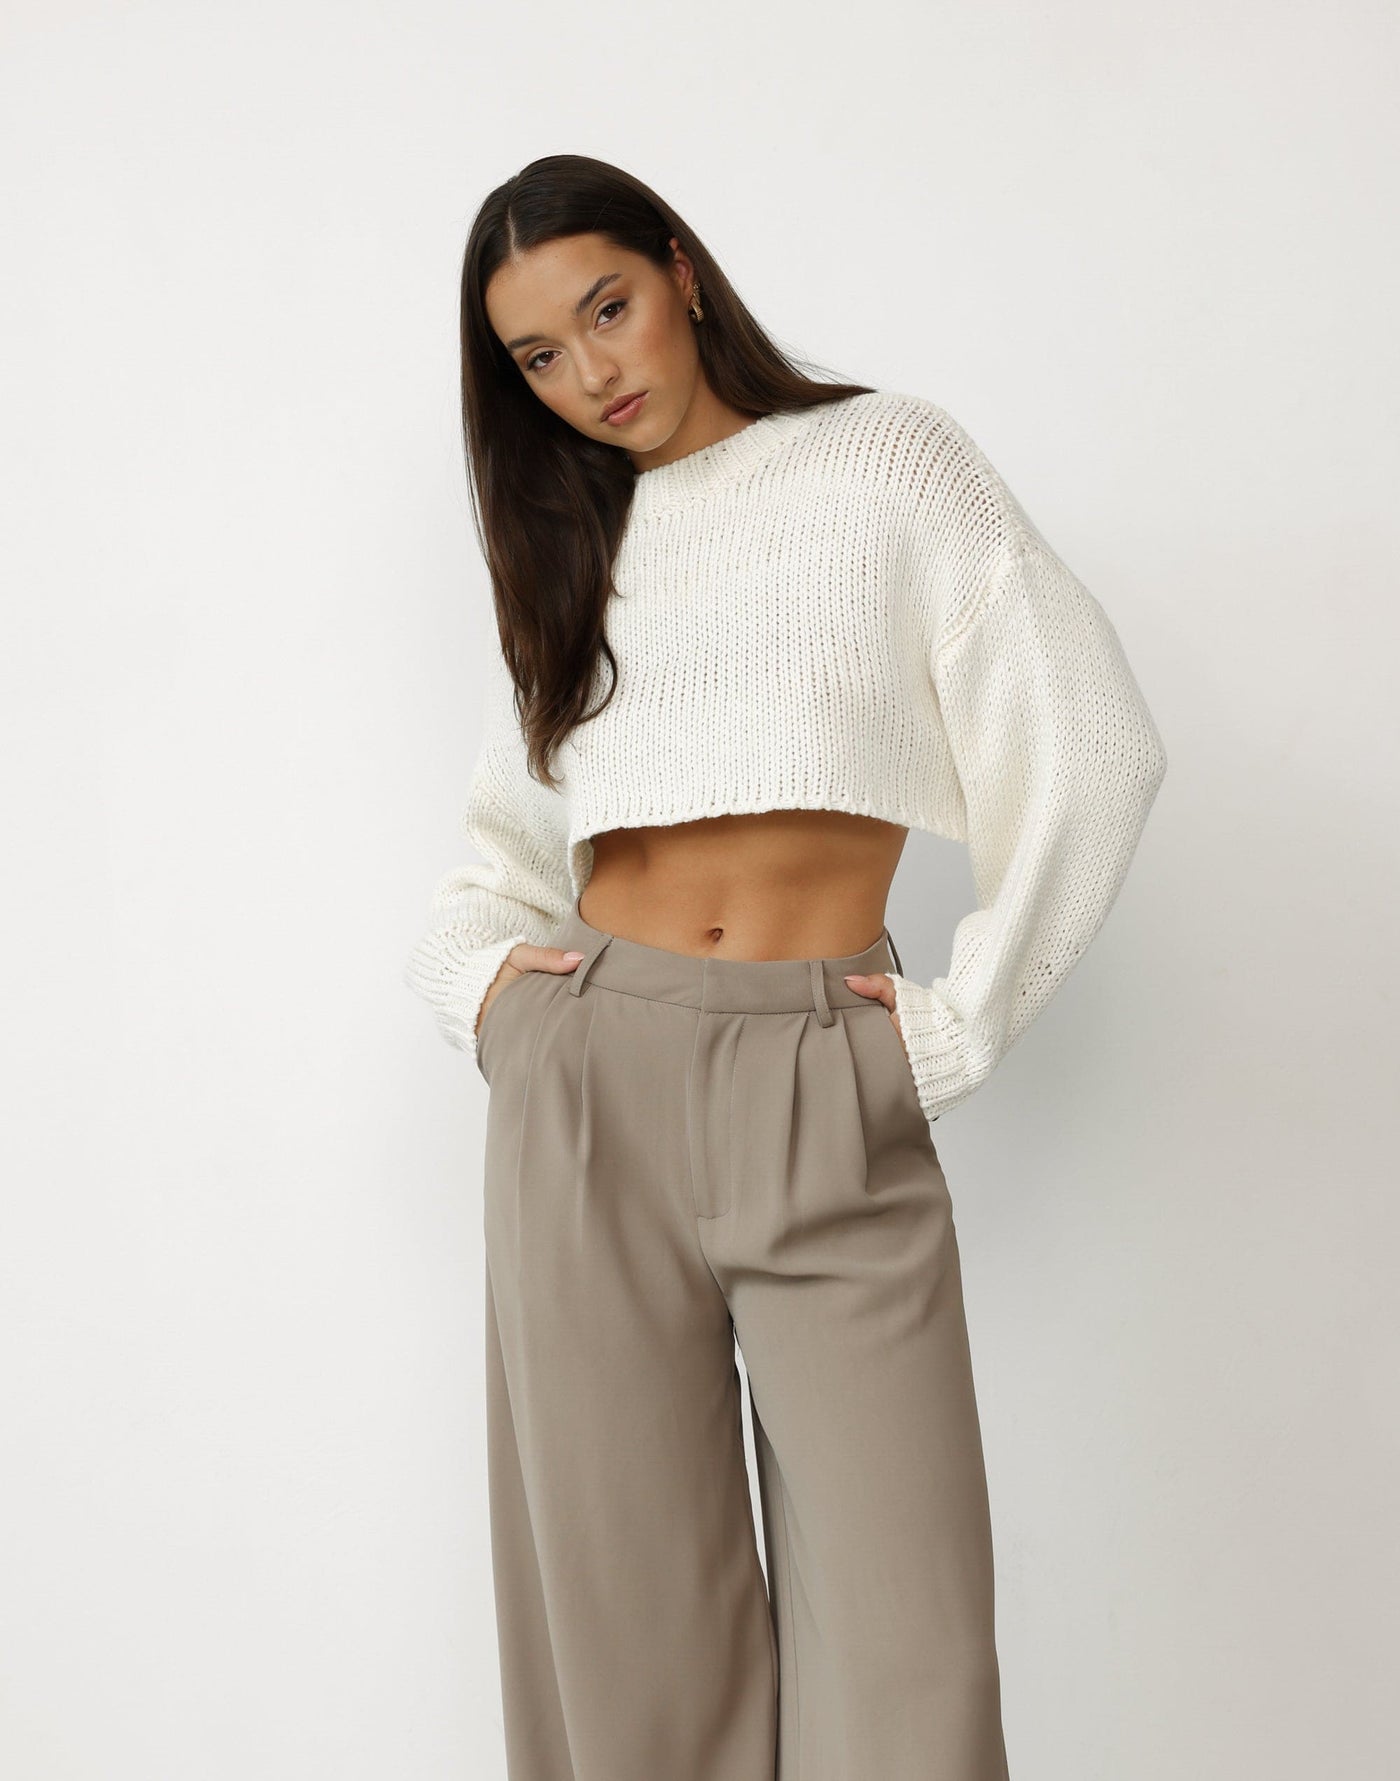 Shane Jumper (Cream) - Cropped Crew Neck Knitted Jumper - Women's Top - Charcoal Clothing